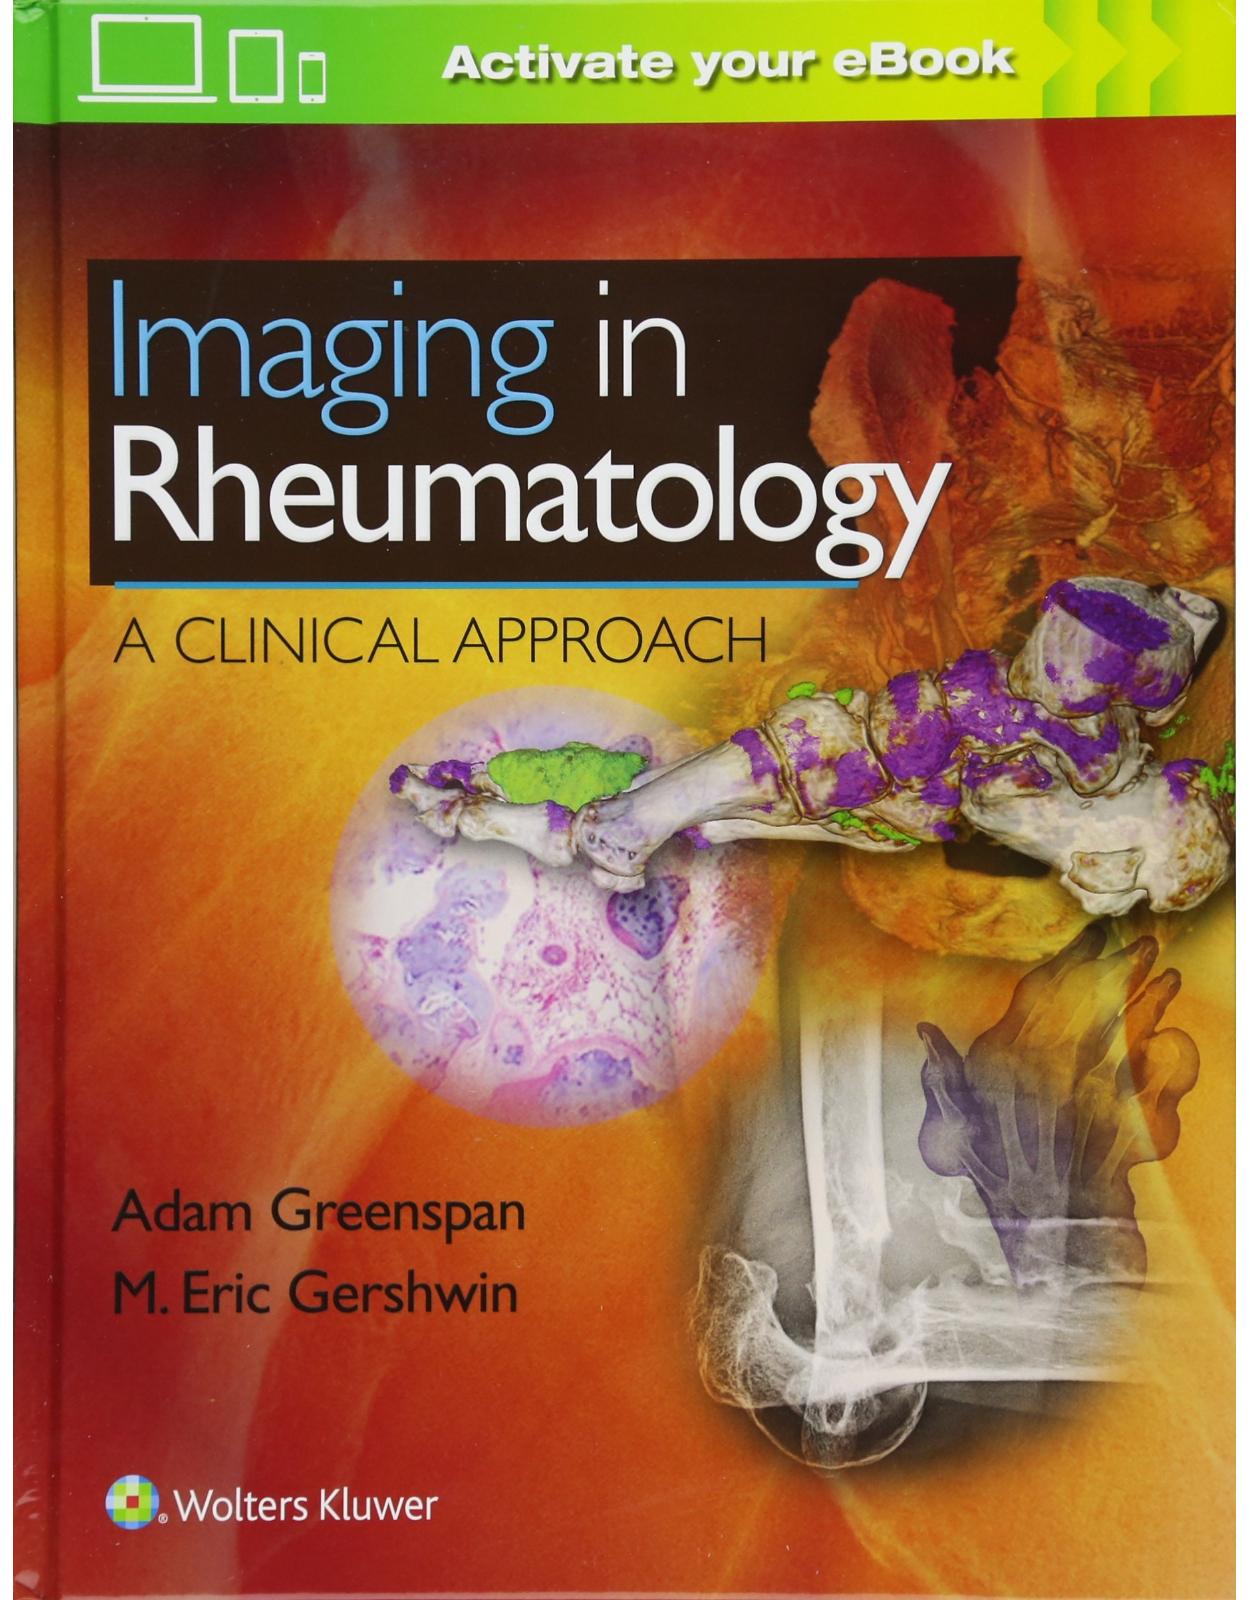 Imaging in Rheumatology: A Clinical Approach